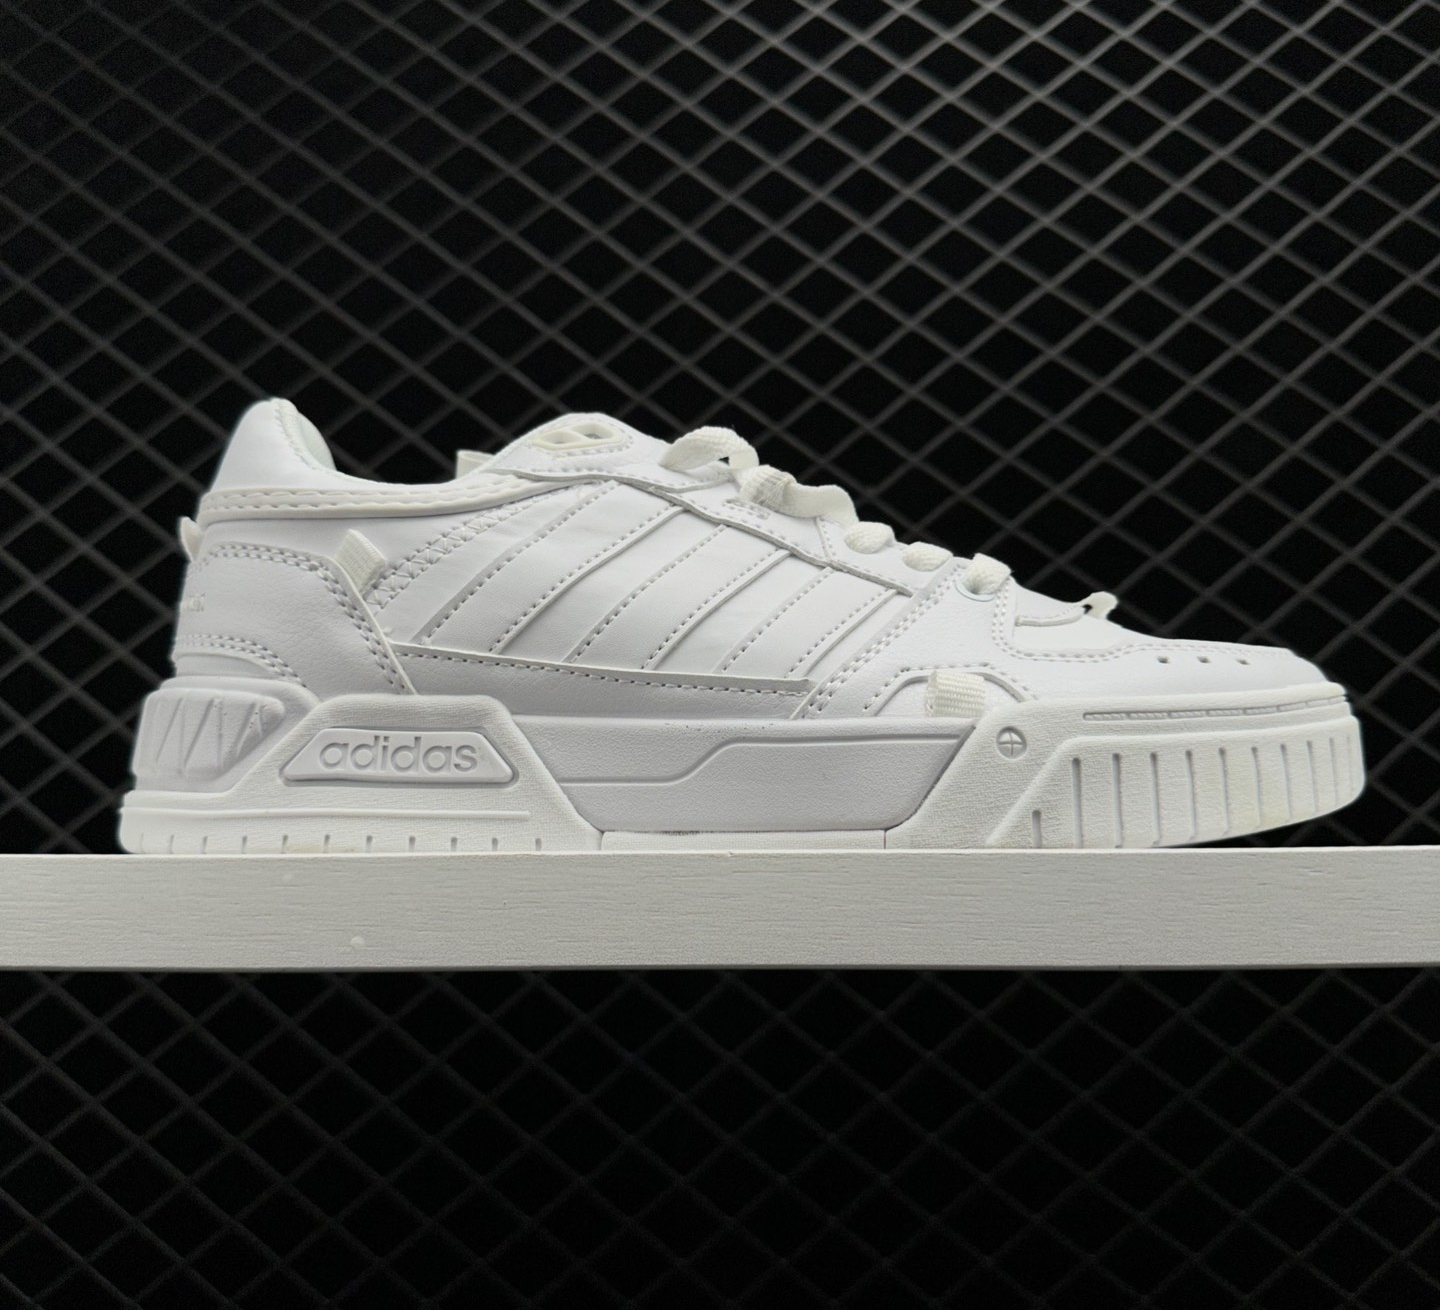 Adidas Neo D-PAD Lifestyle Shoes 'Cloud White' IG7588 - Stylish and Comfy Footwear